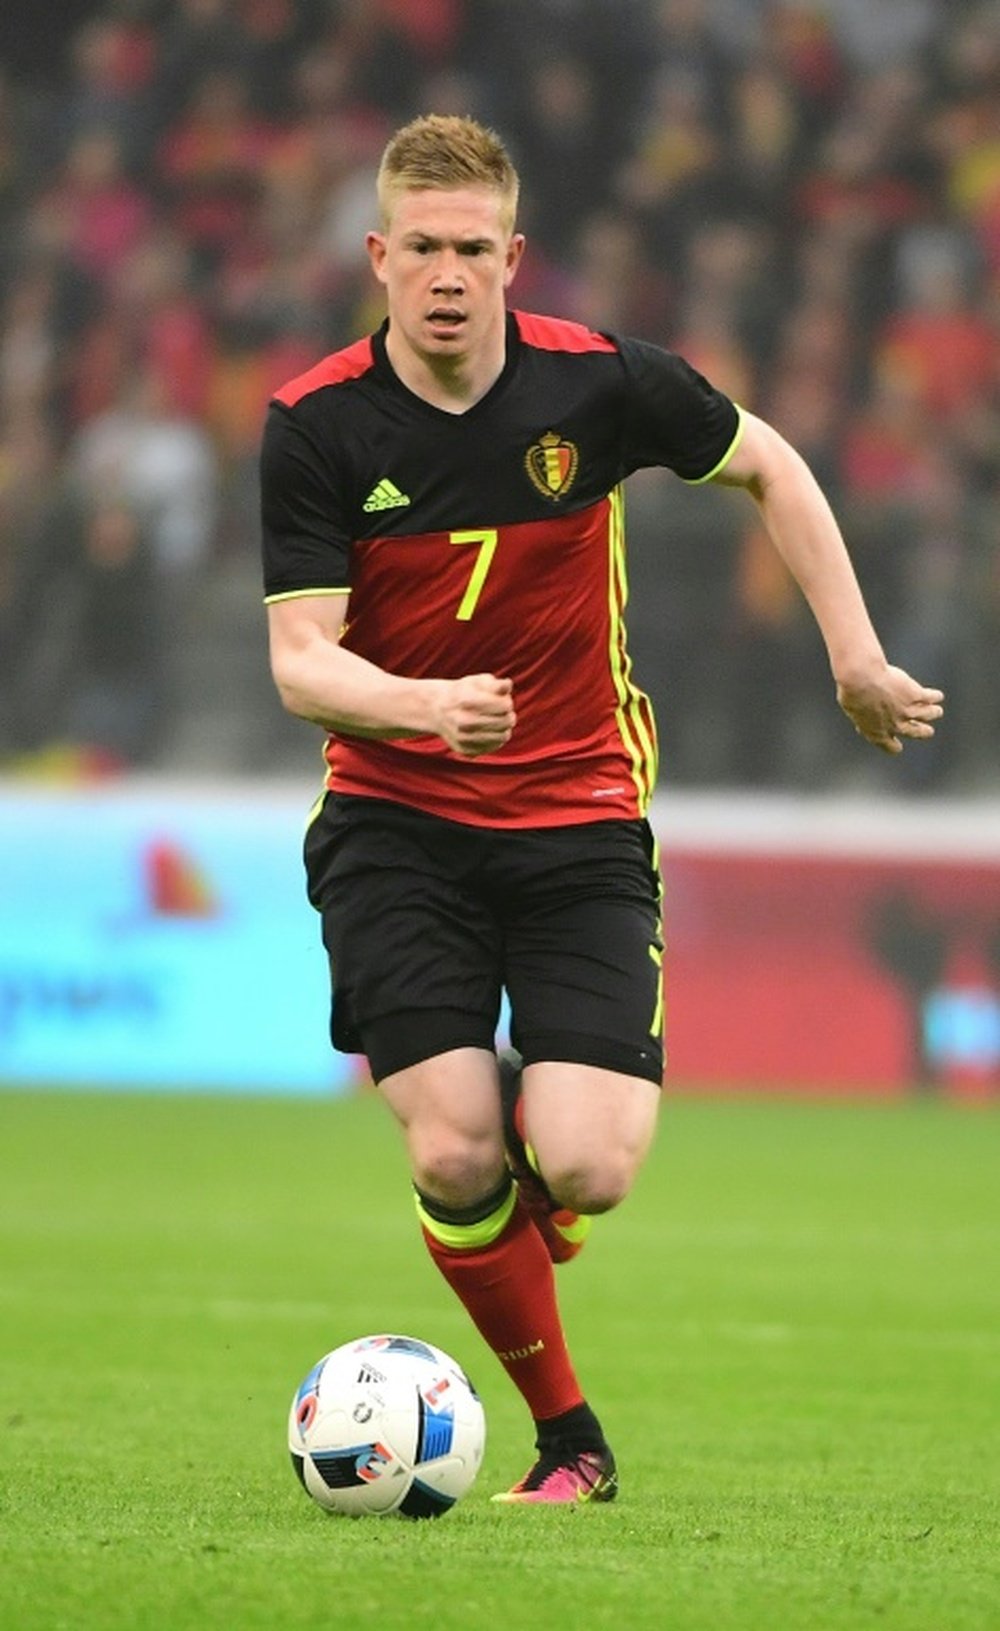 Belgium's midfielder Kevin De Bruyne has set his sights on the Euro 2016 final. BeSoccer